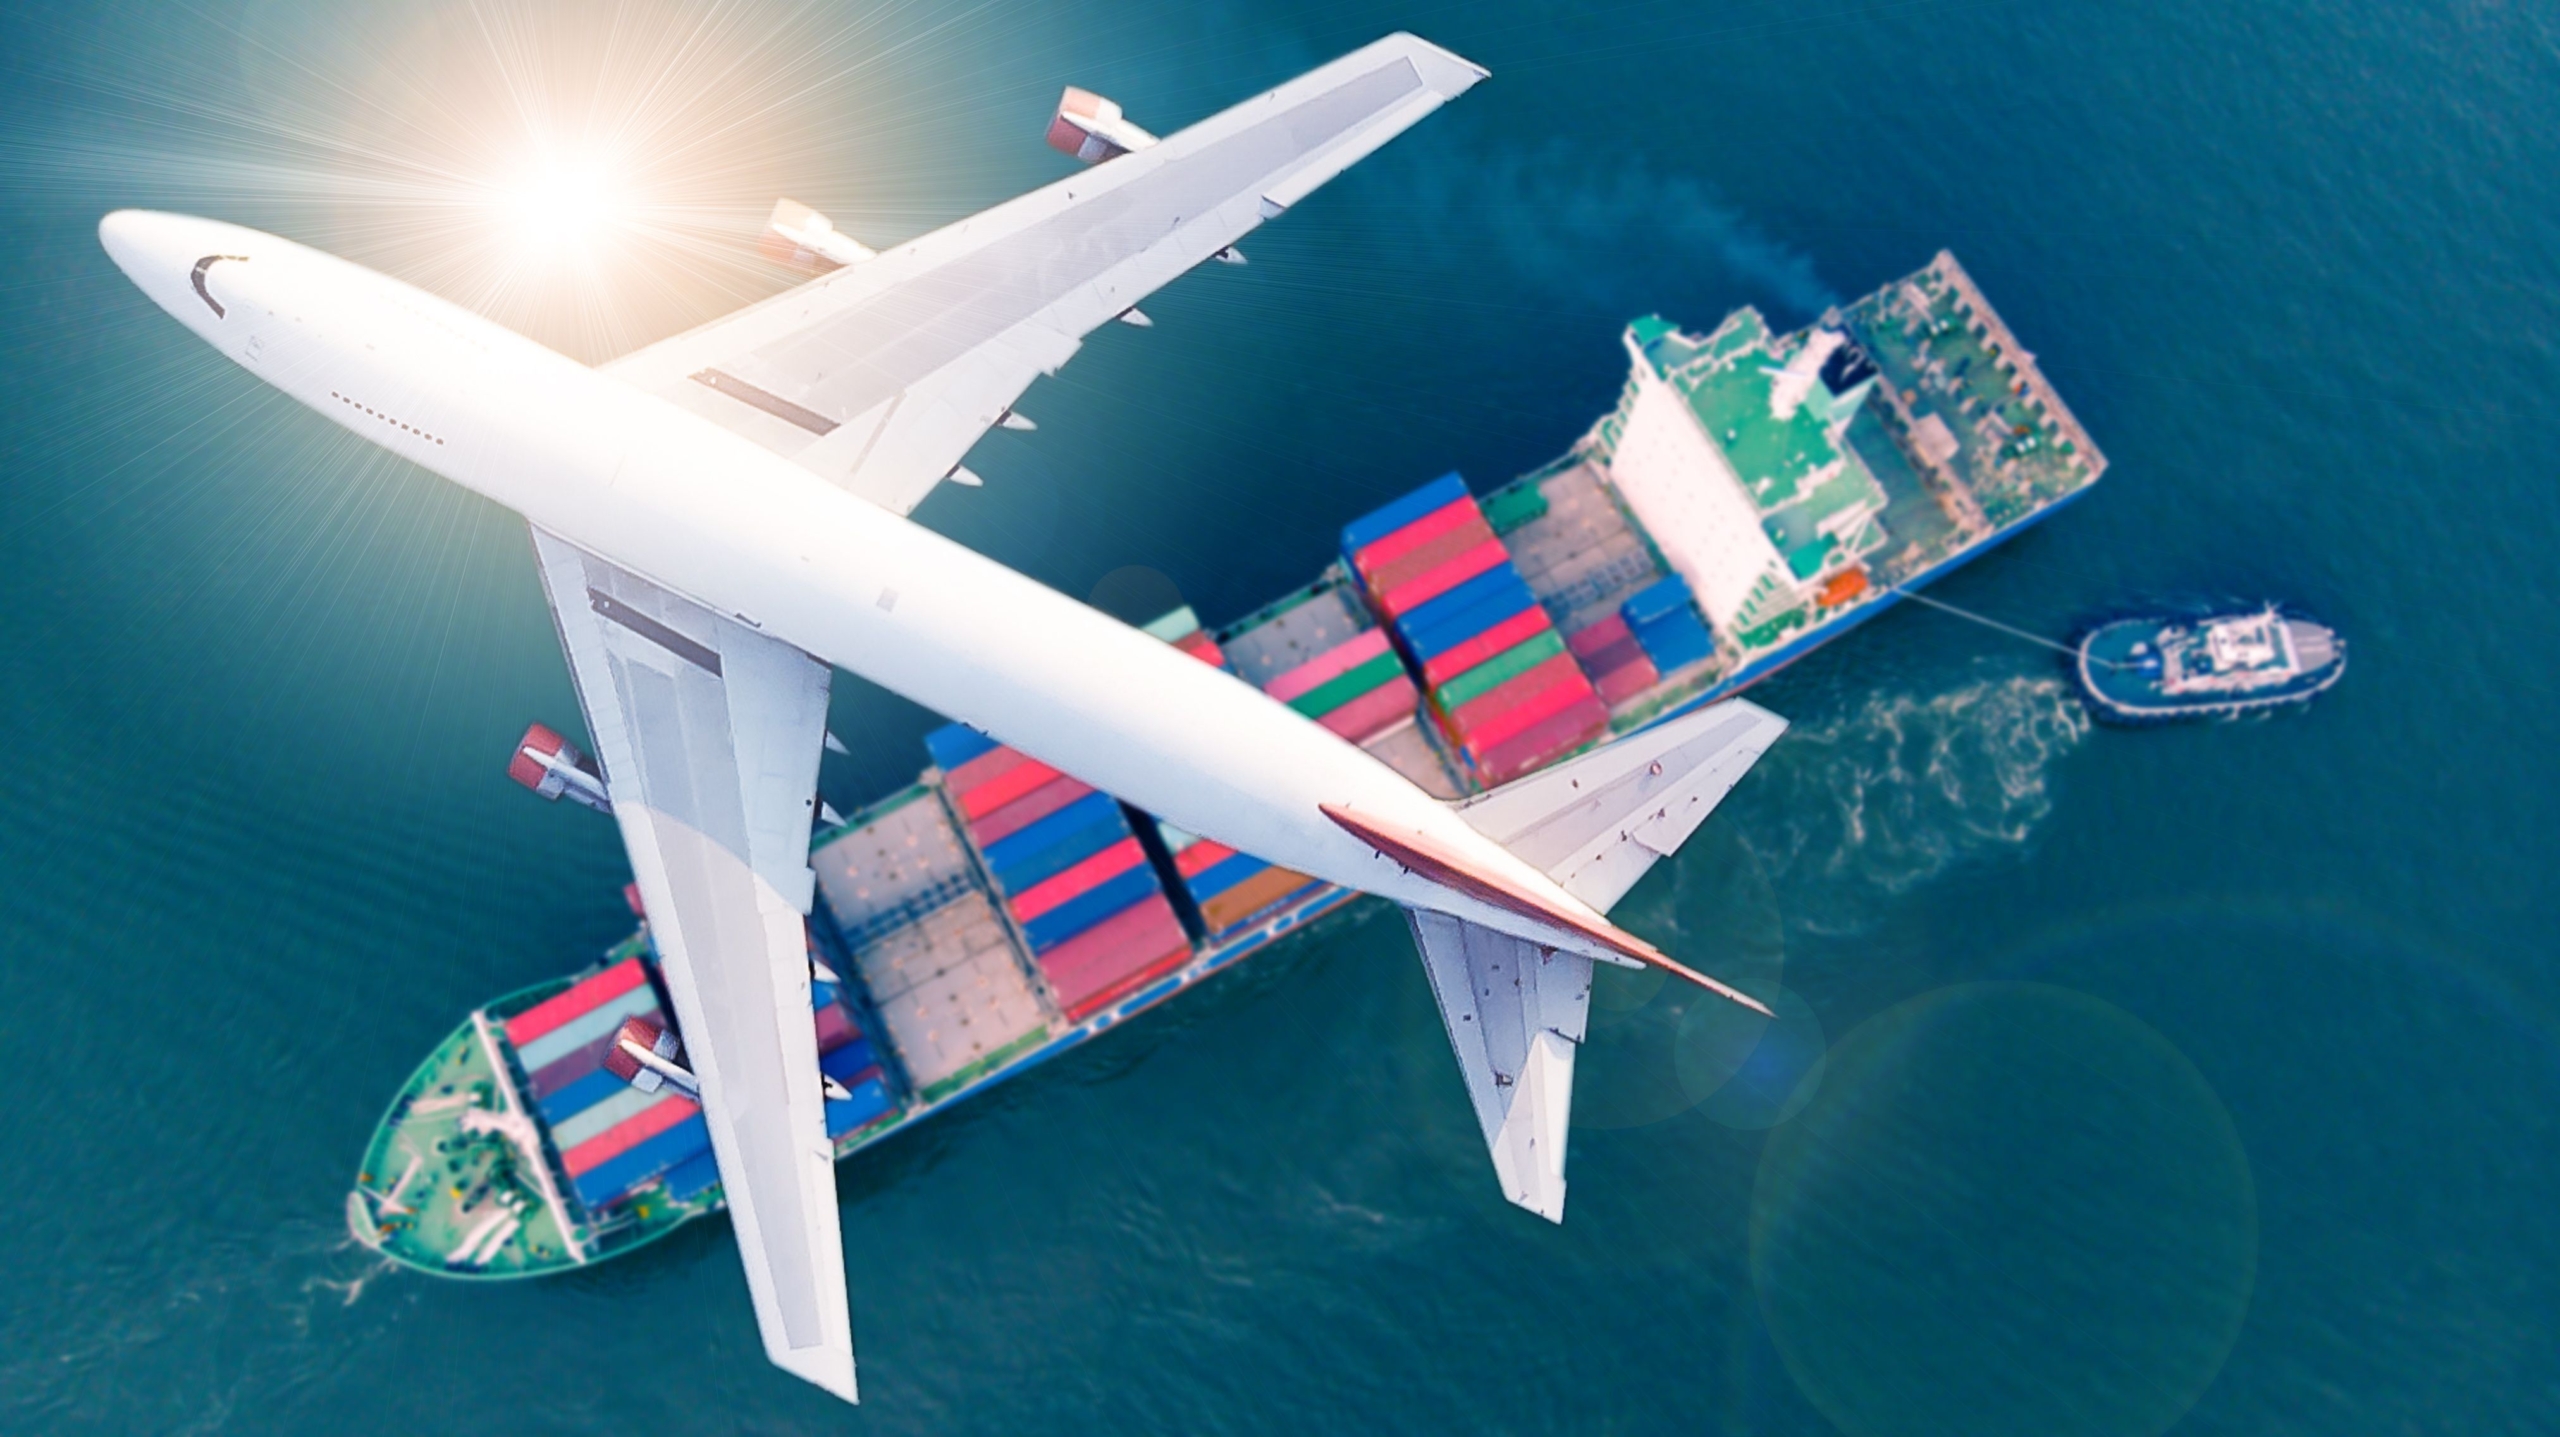 Global Freight Forwarders Hand DDC the Burden of Brexit Paperwork